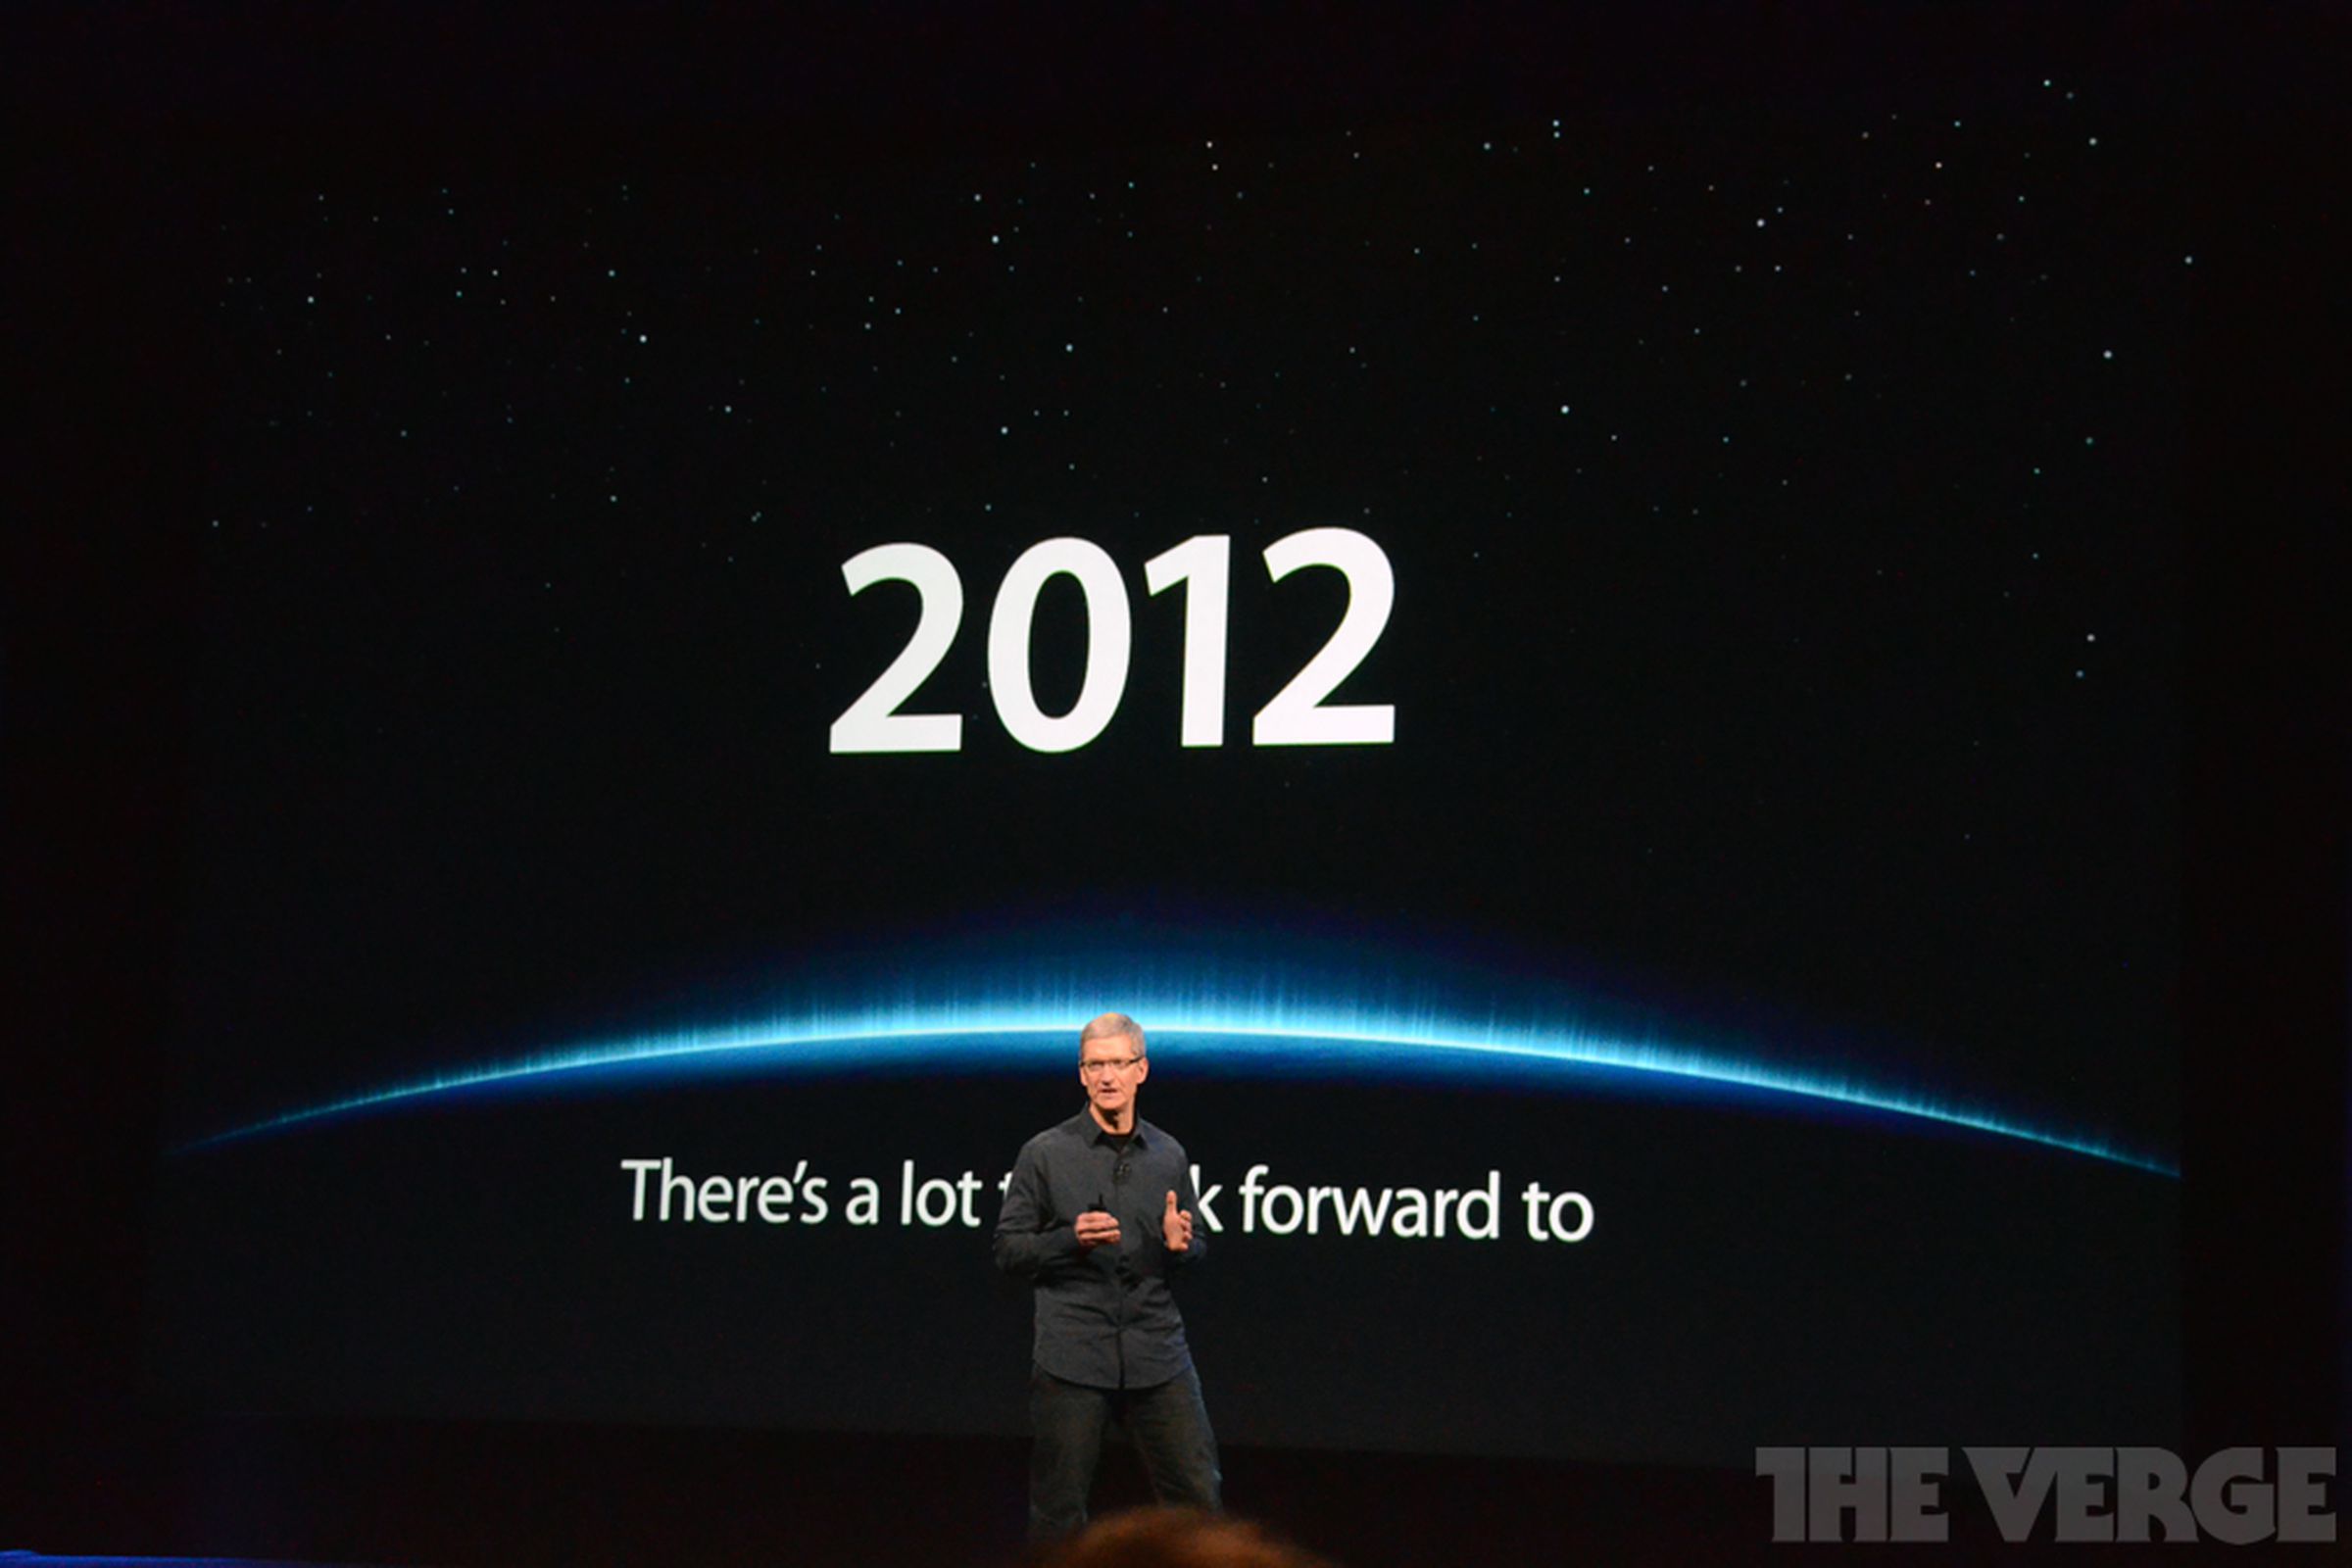 Tim Cook looking forward to 2012